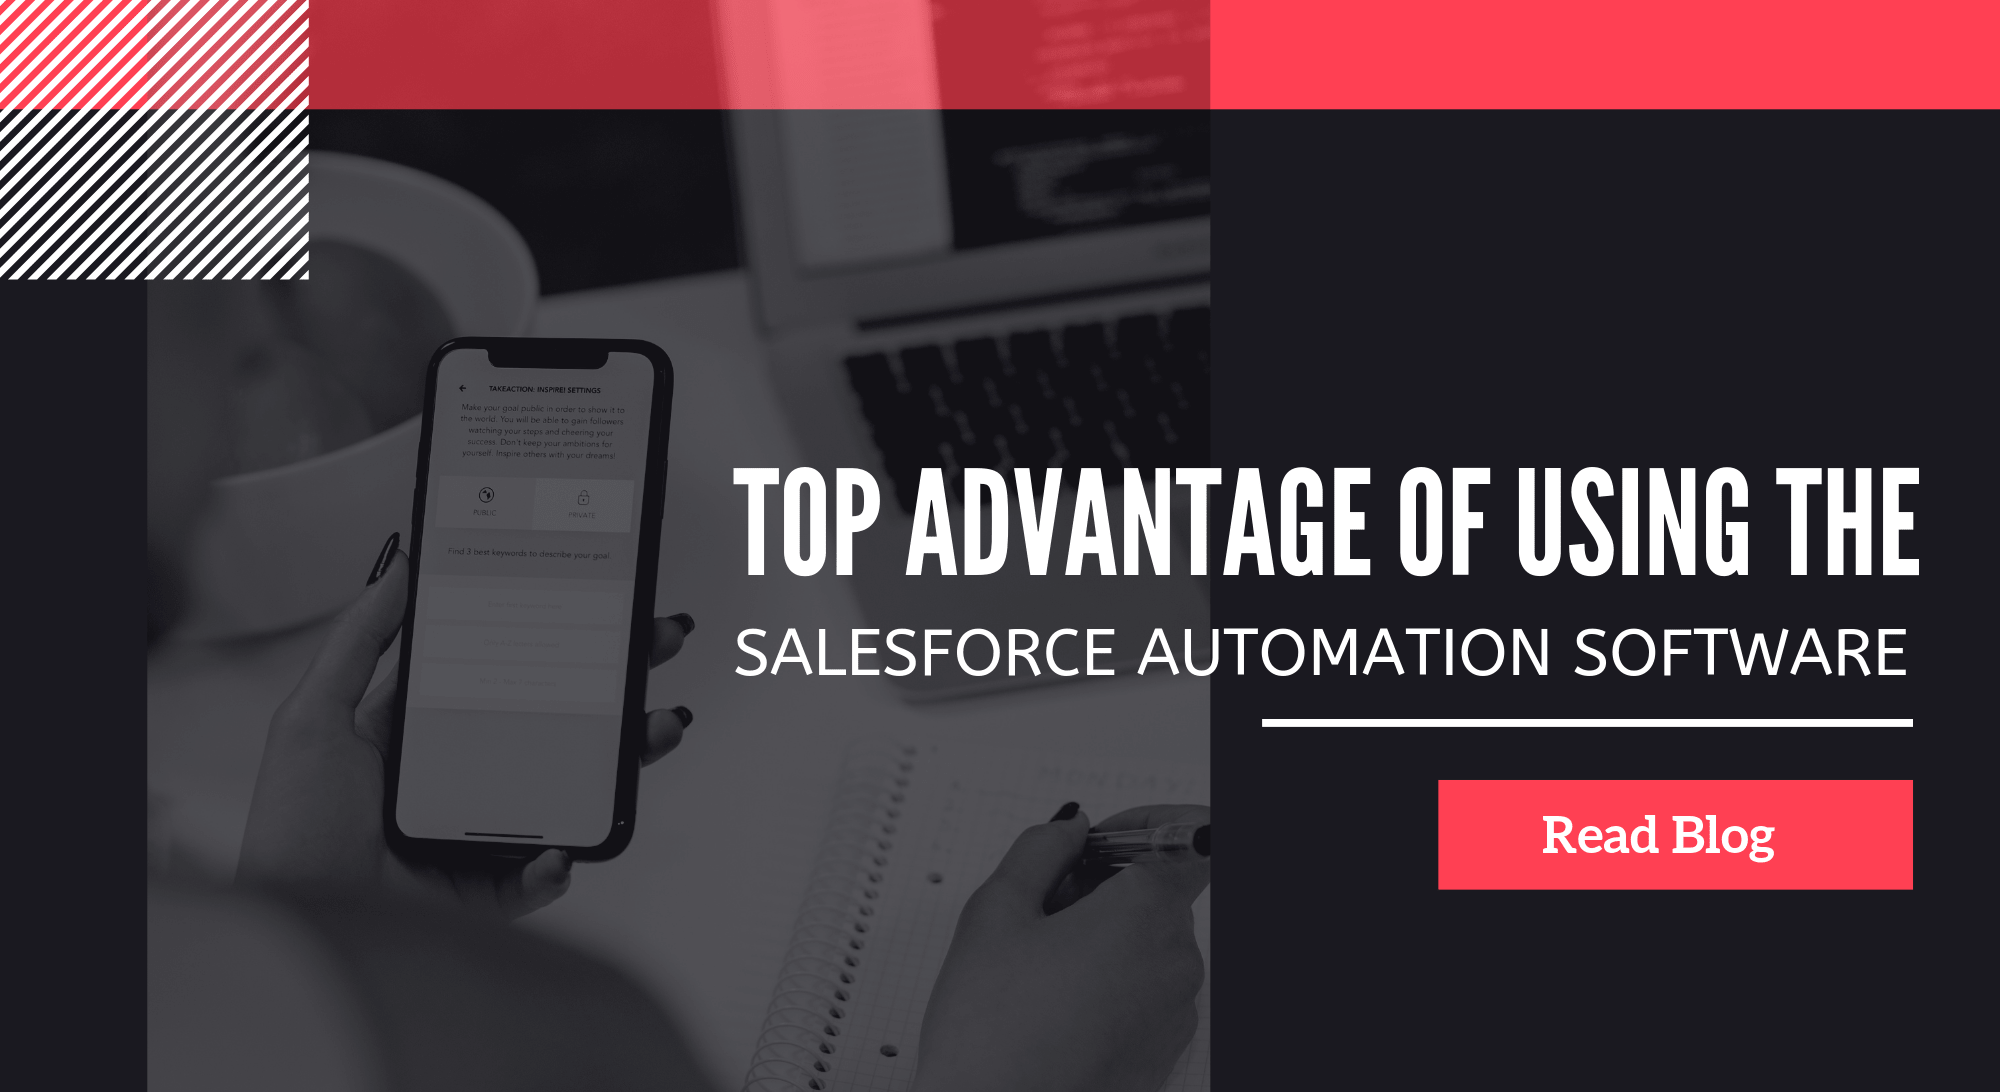 Top Advantage of Using the Salesforce Automation Software